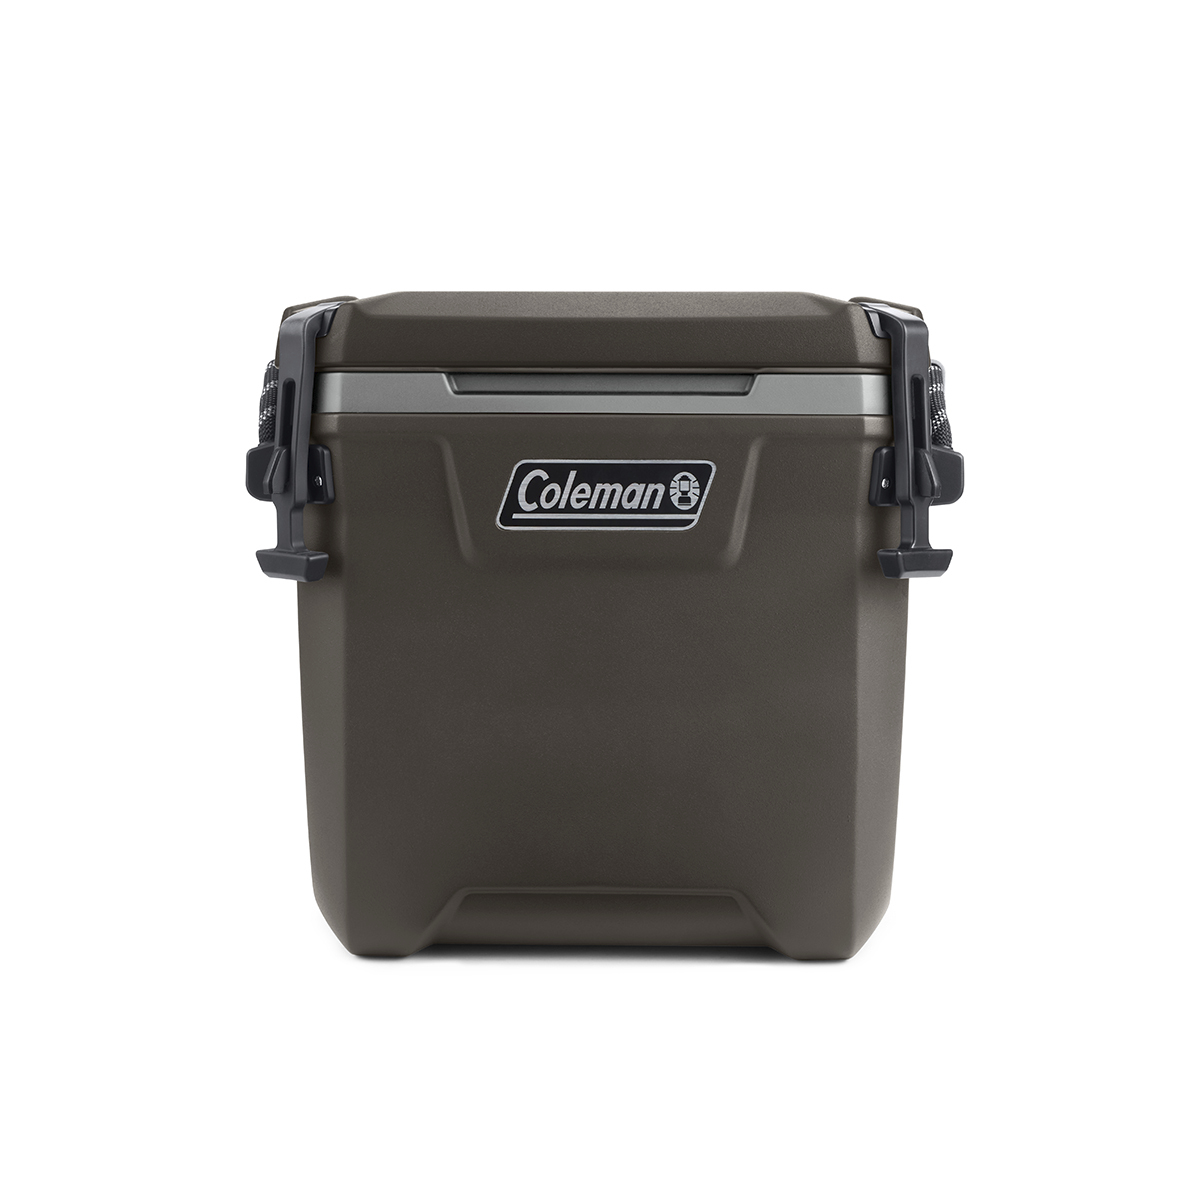 Coleman Convoy High Performance Series 28qt Hard Ice Chest Cooler, Brown, 17.75"' x'13.25" x 19.5" - image 1 of 11